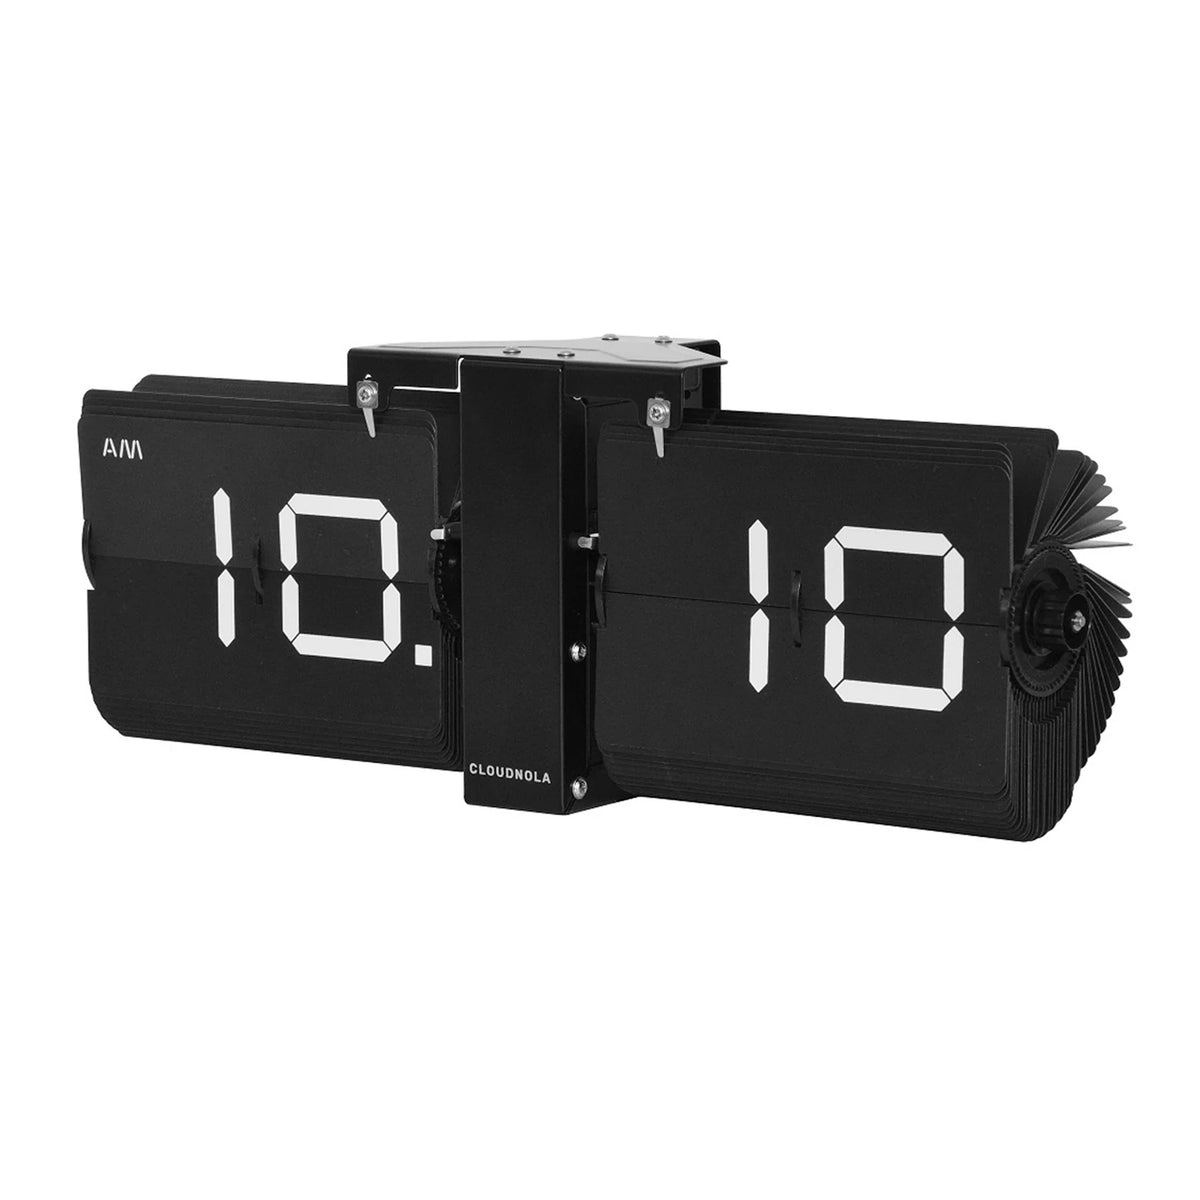 The Flipping Out Clock: Black on display.